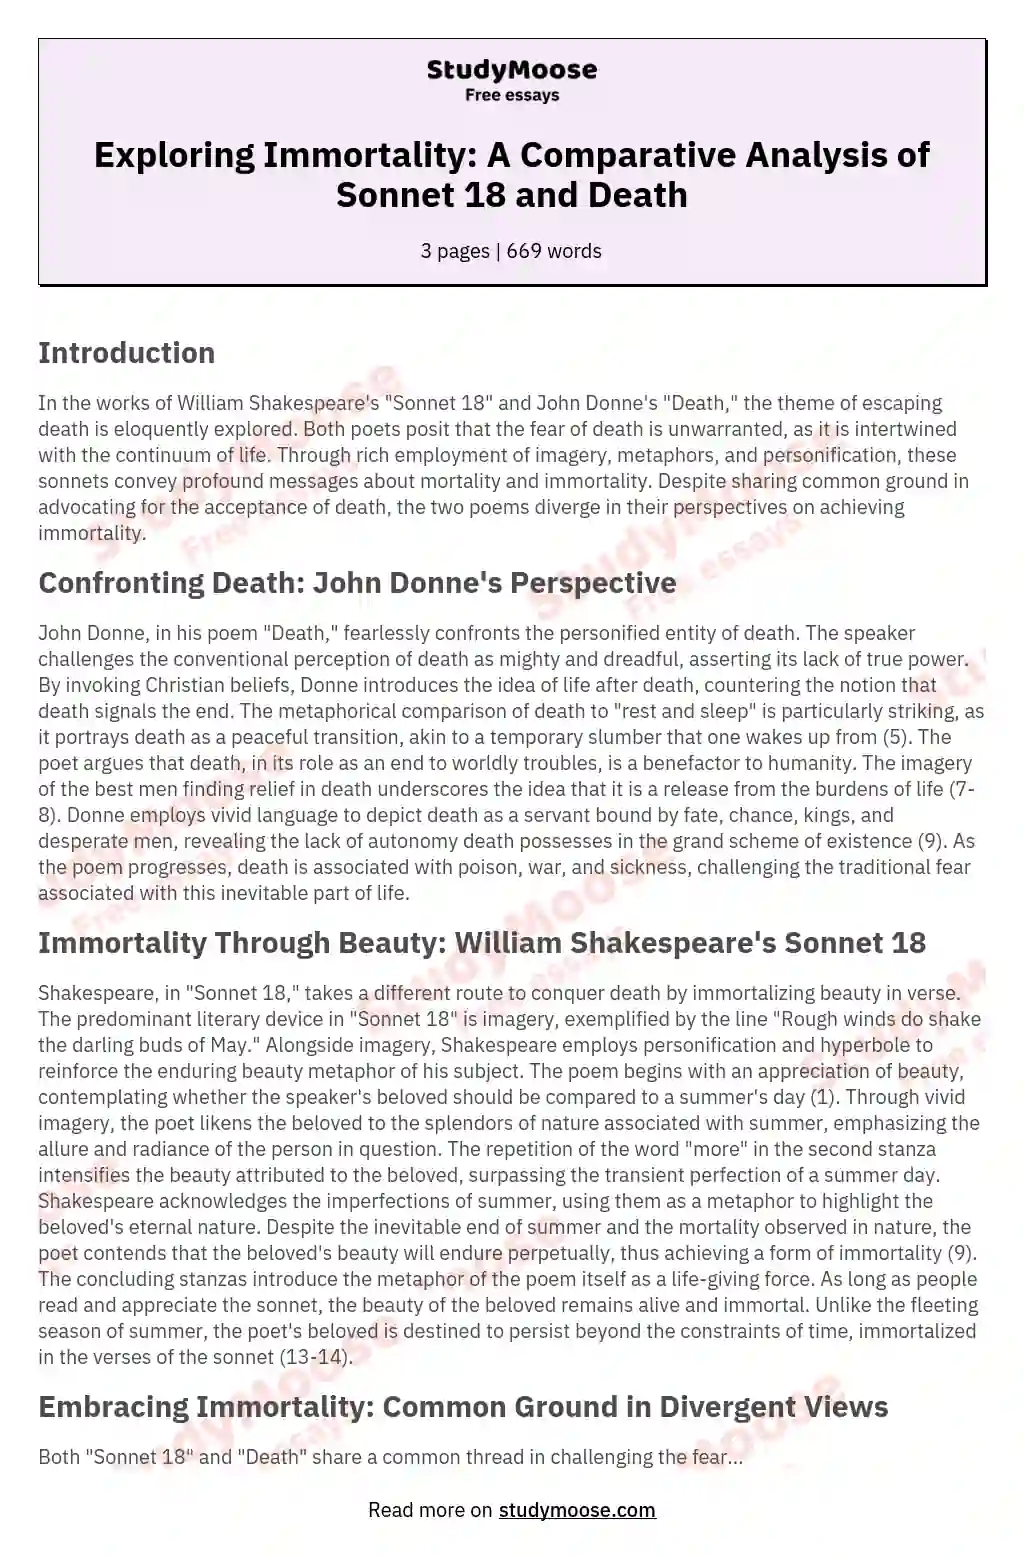 Exploring Immortality: A Comparative Analysis of Sonnet 18 and Death essay